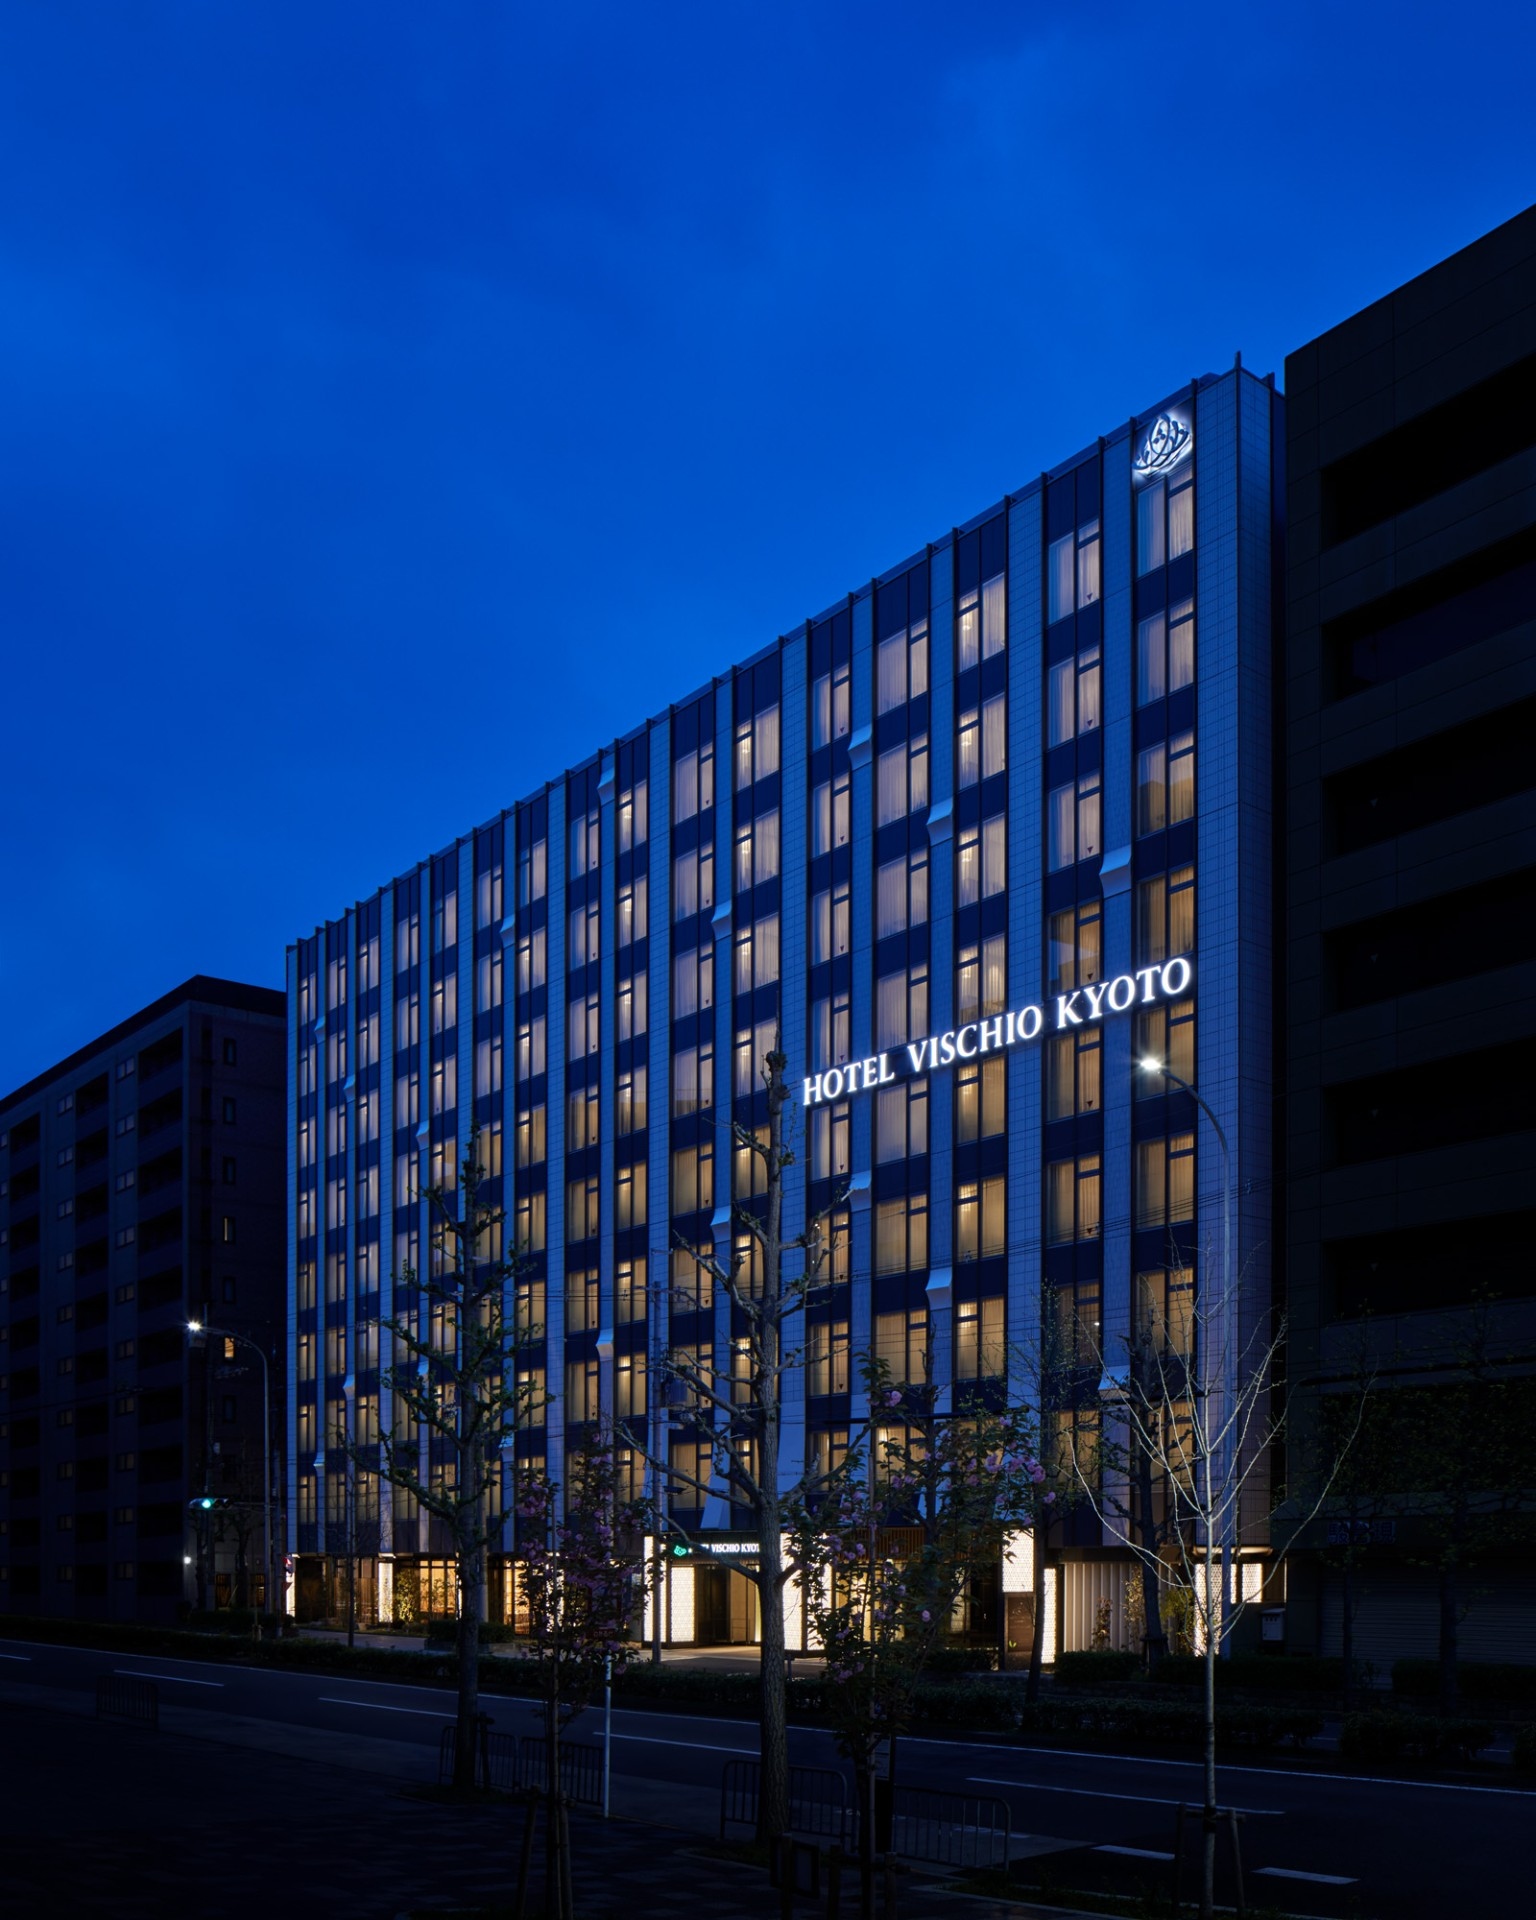 JR-West Hotels Announces the Opening of New-Brand Hotel “HOTEL VISCHIO KYOTO” by Granvia “ on May 30, 2019